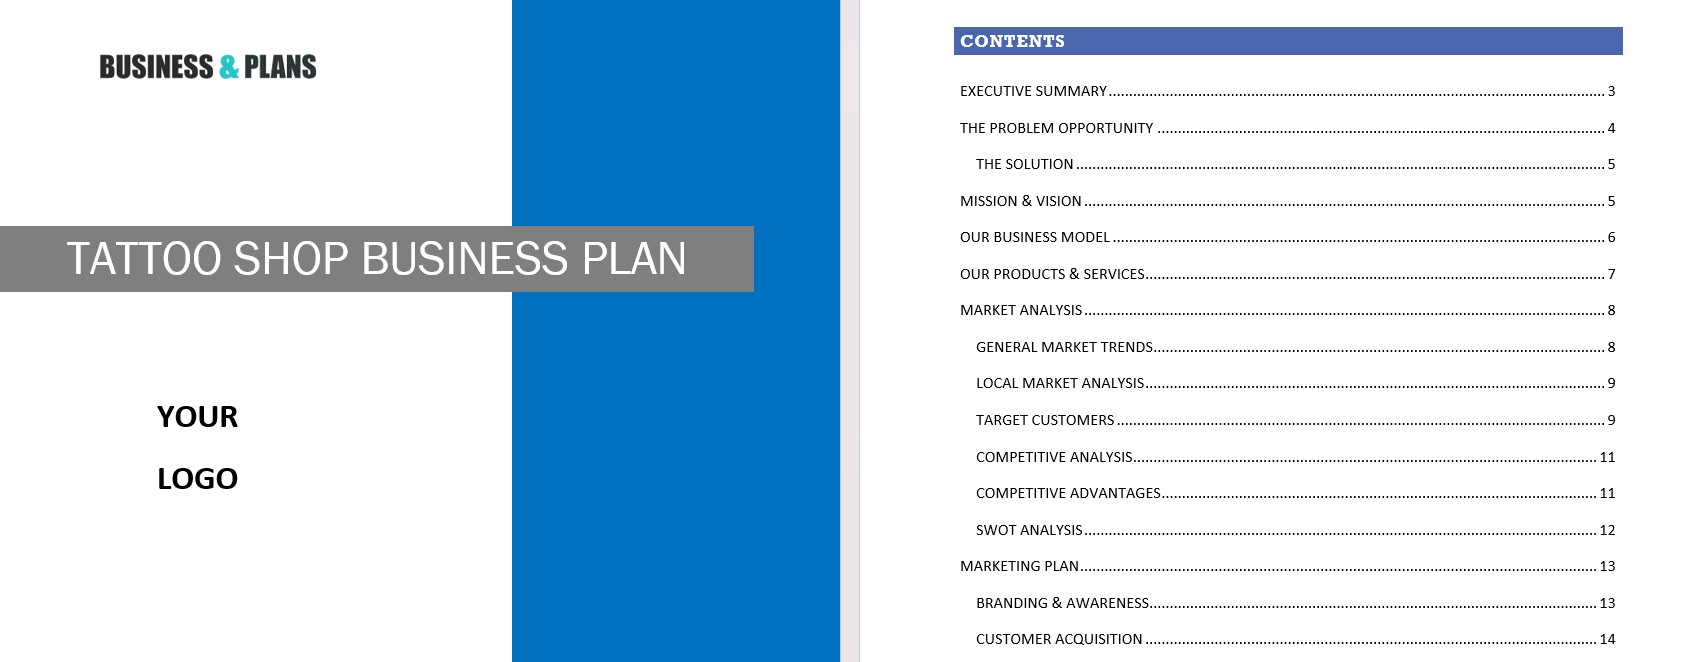 Tattoo shop business plan template in Word